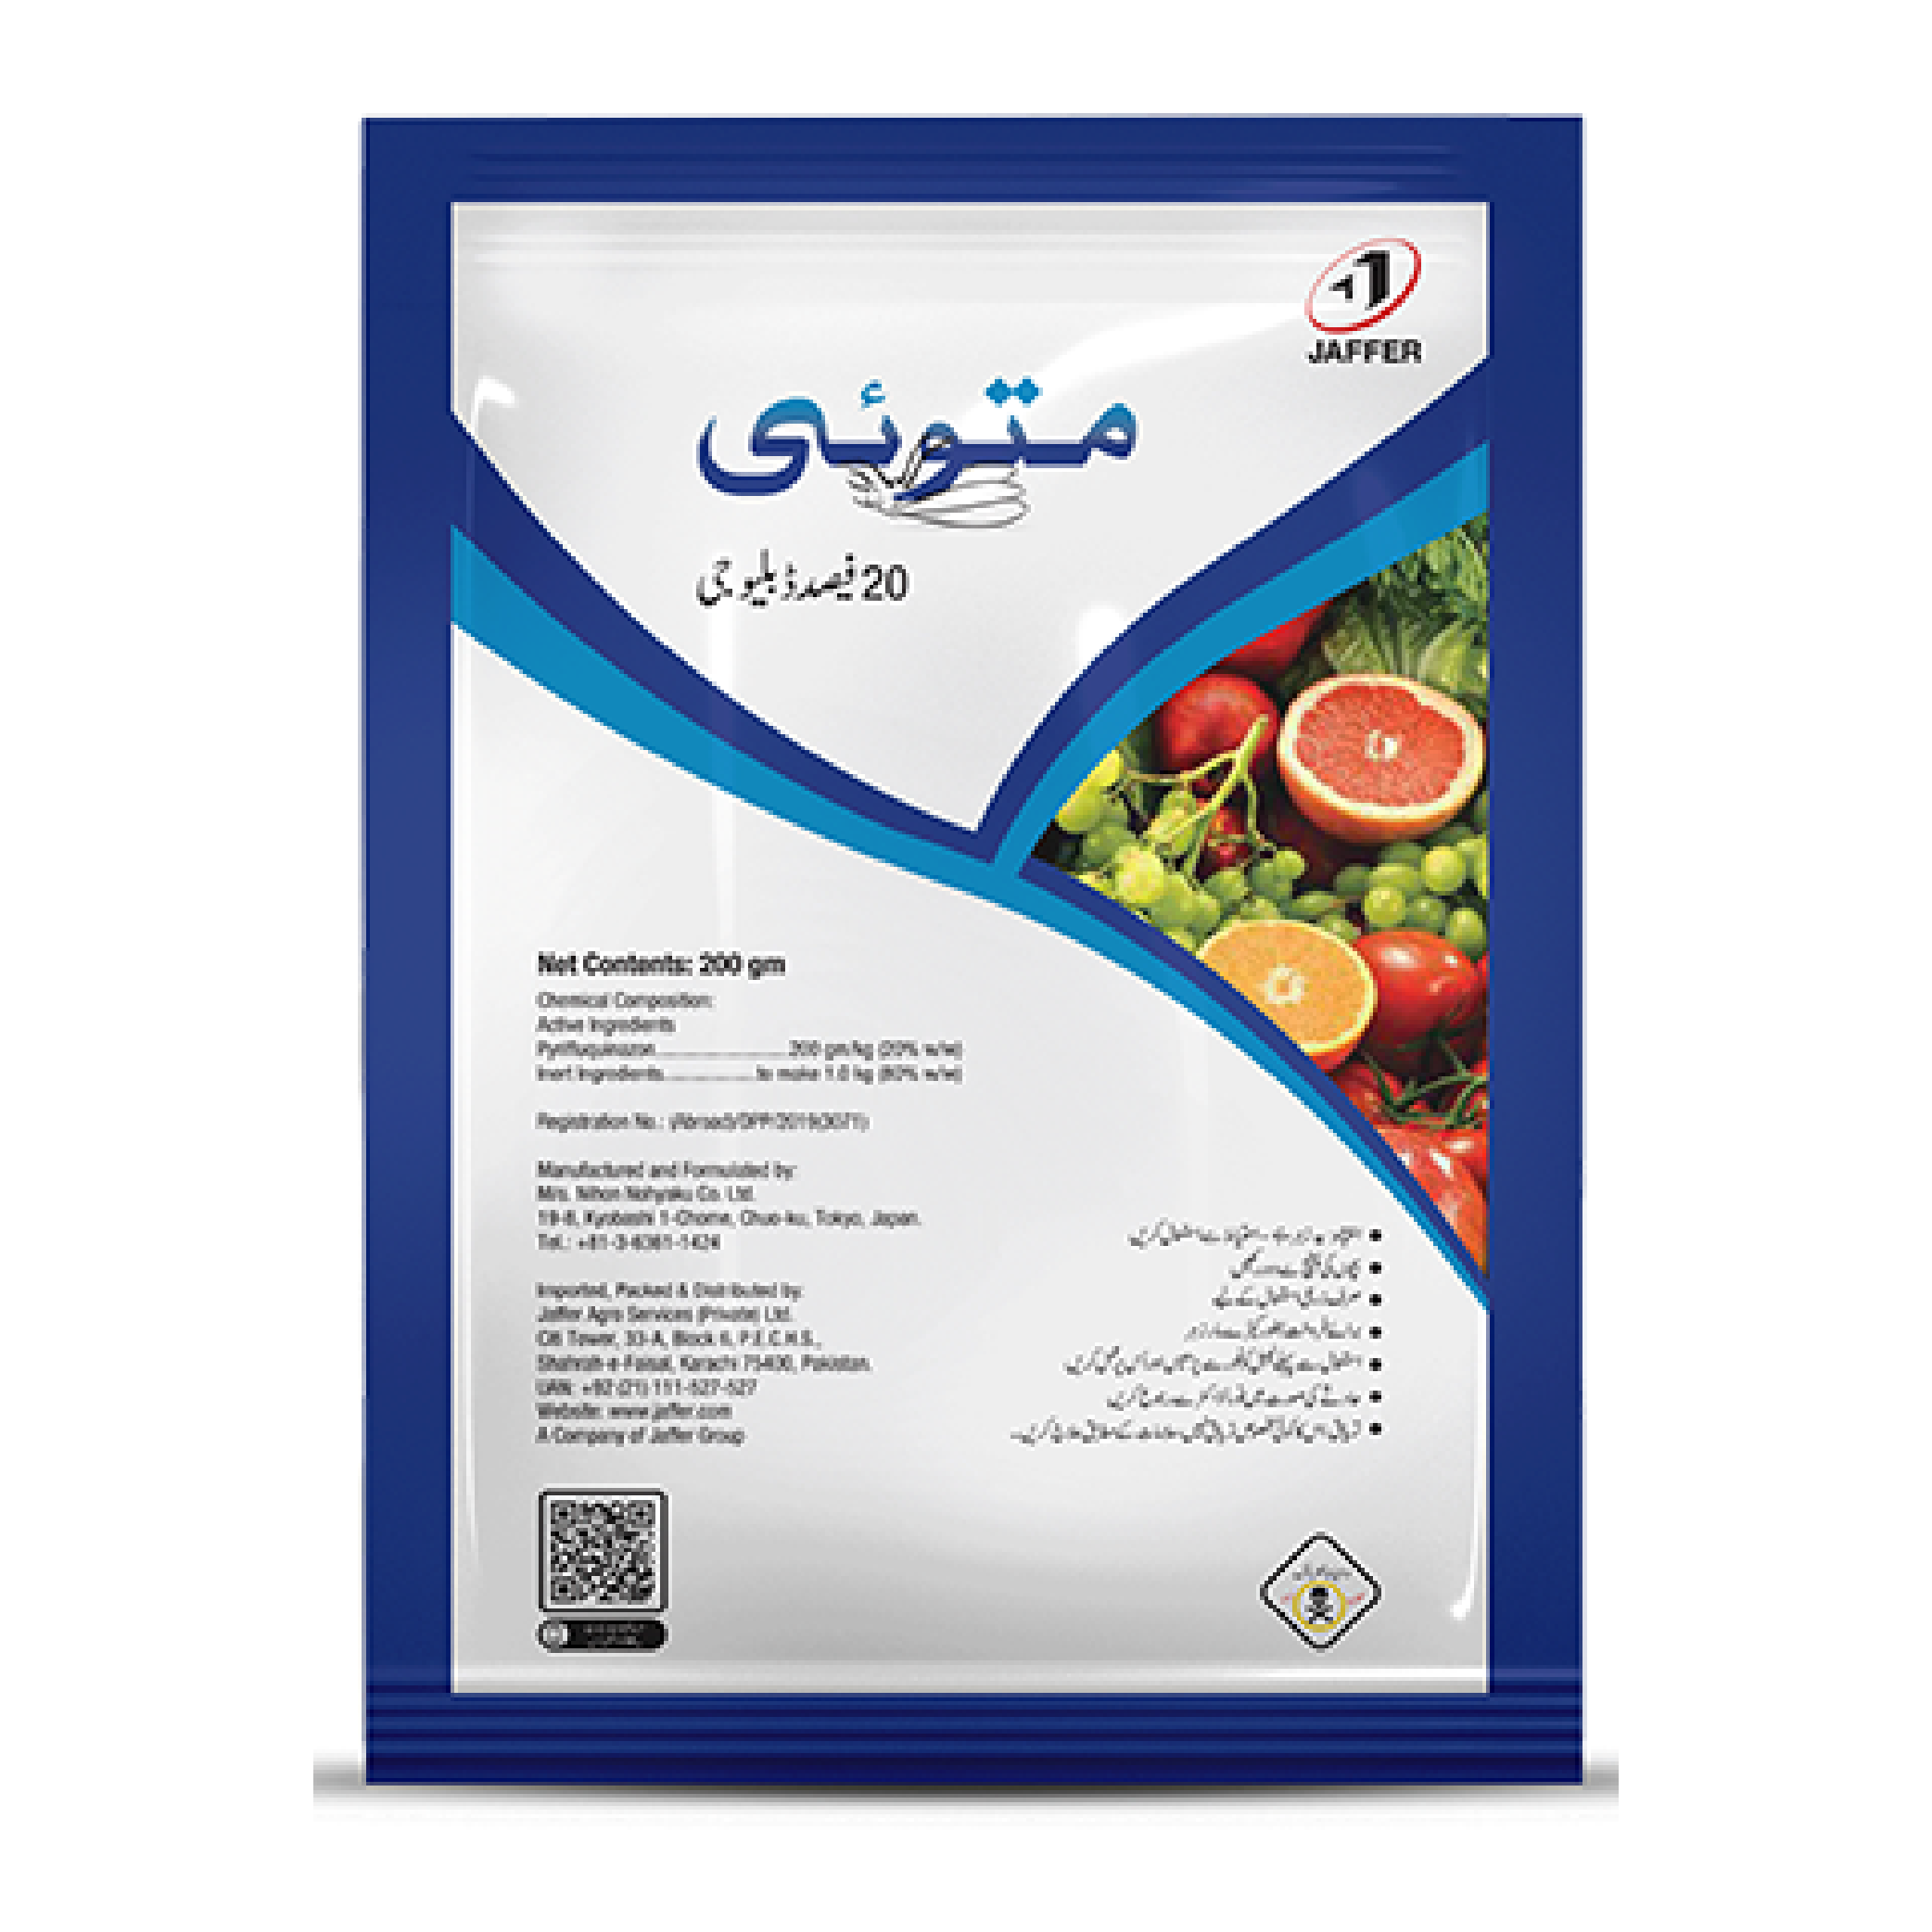 2nd Matoi 20wg Pyrifluquinazon 200gm Insecticide Jaffer Agro Services